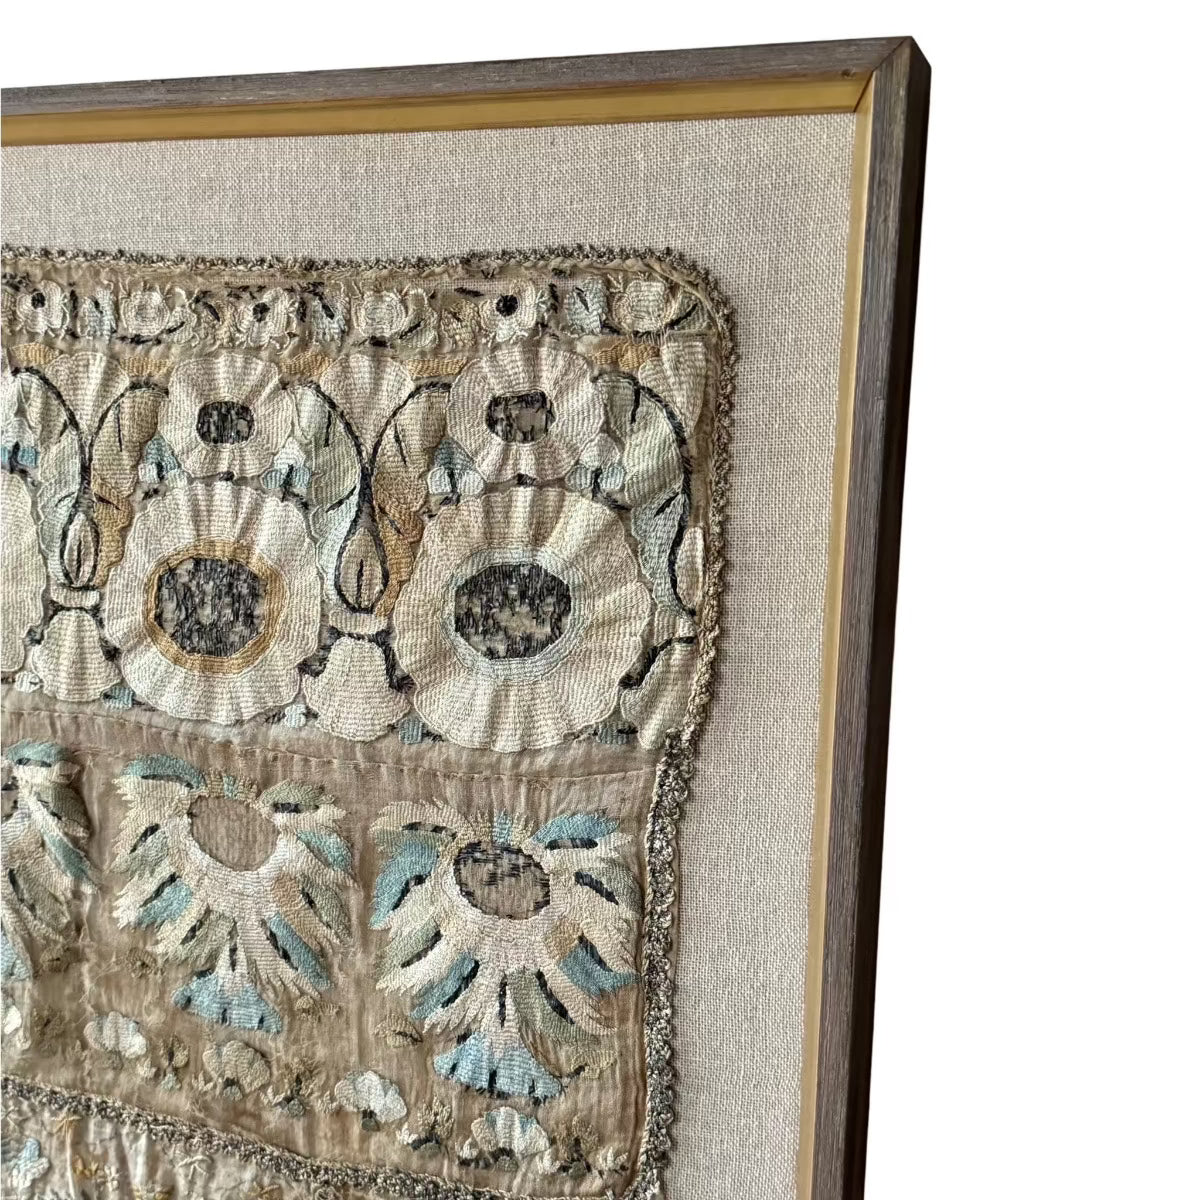 Framed 18th Century Muslin Hand Embroidered Ottoman Towels (430423) Antique Textile Rebecca Vizard 